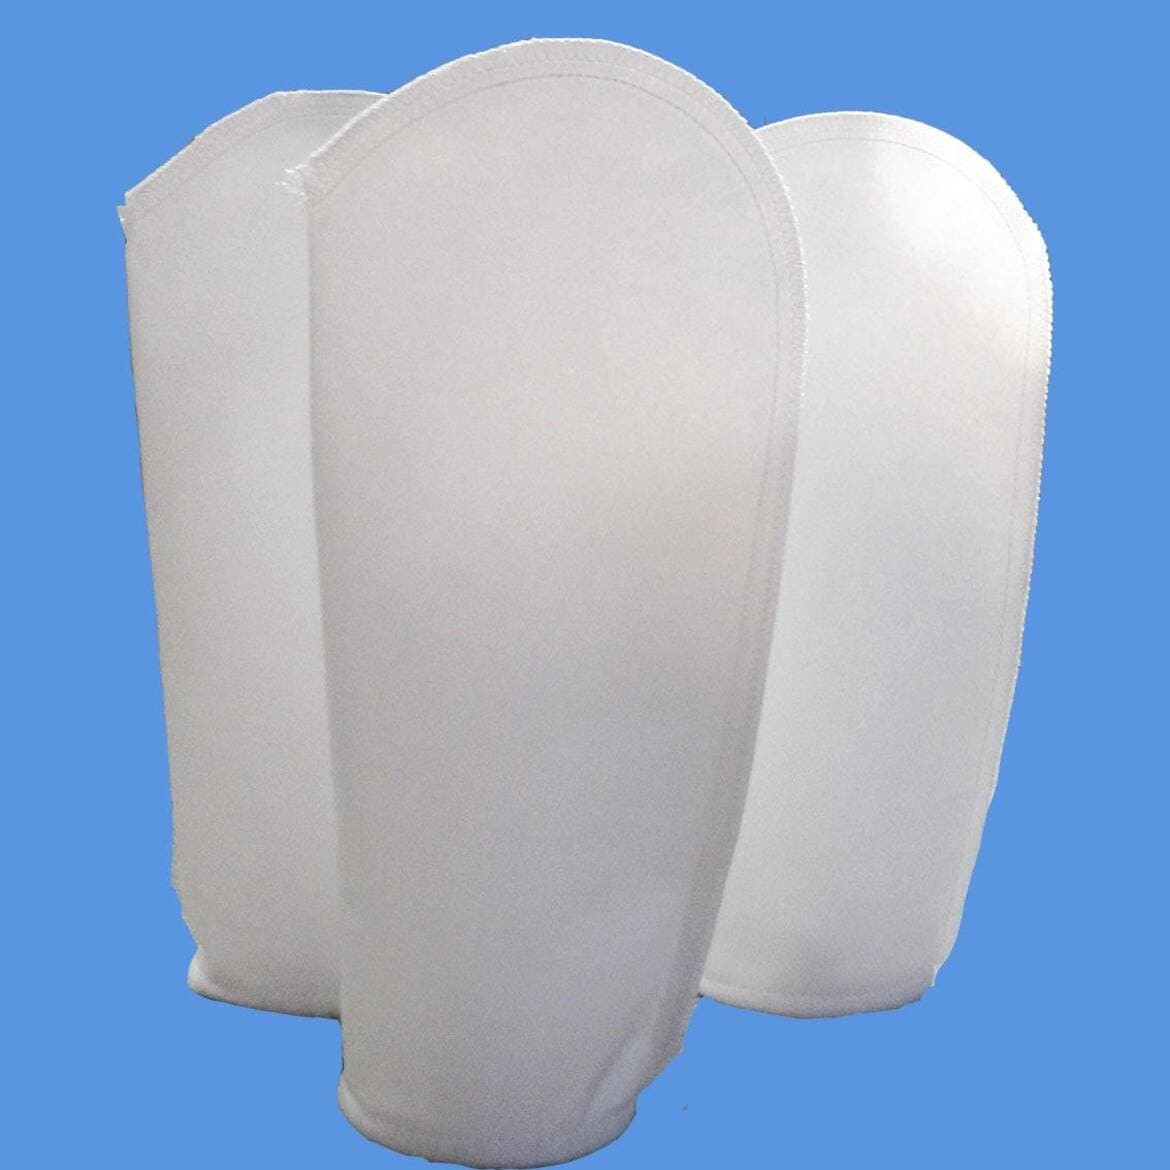 20 Micron Filter Bags: Navigating the World of Filtration Yancheng Vision Manufacture Technology Co., Ltd